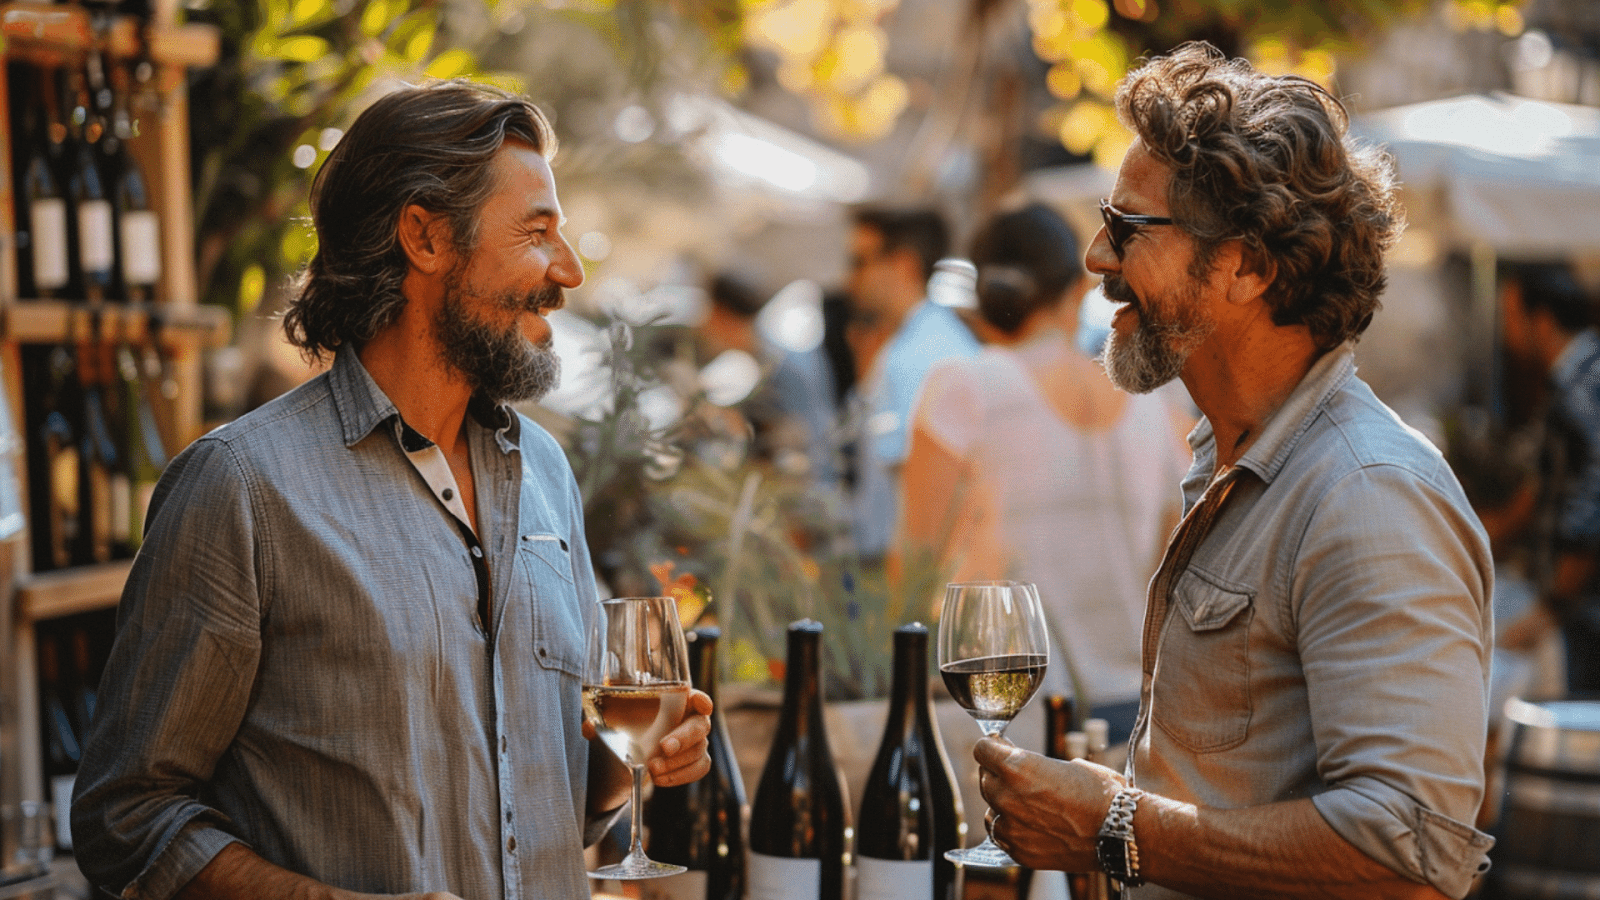 Two men sharing a toast at a wine tasting event in Pollensa.